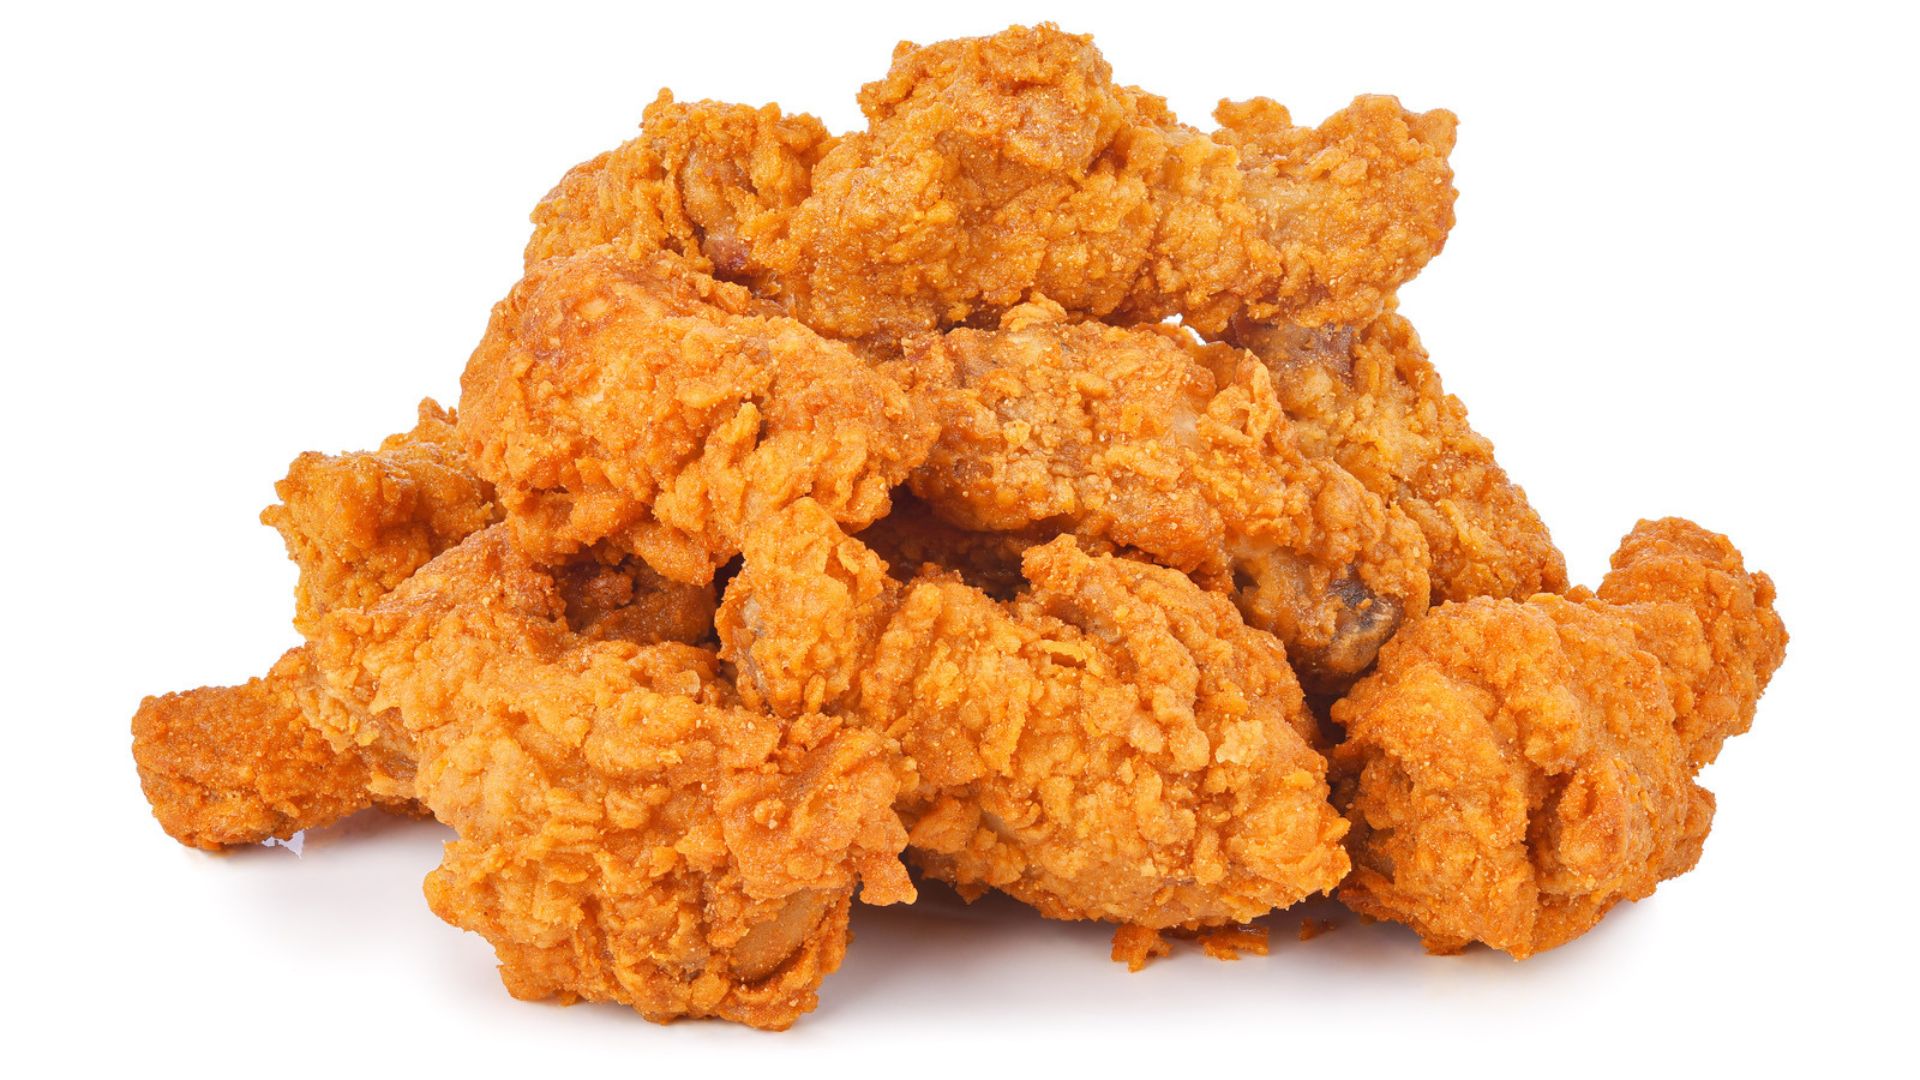 this image shows Fried Chicken